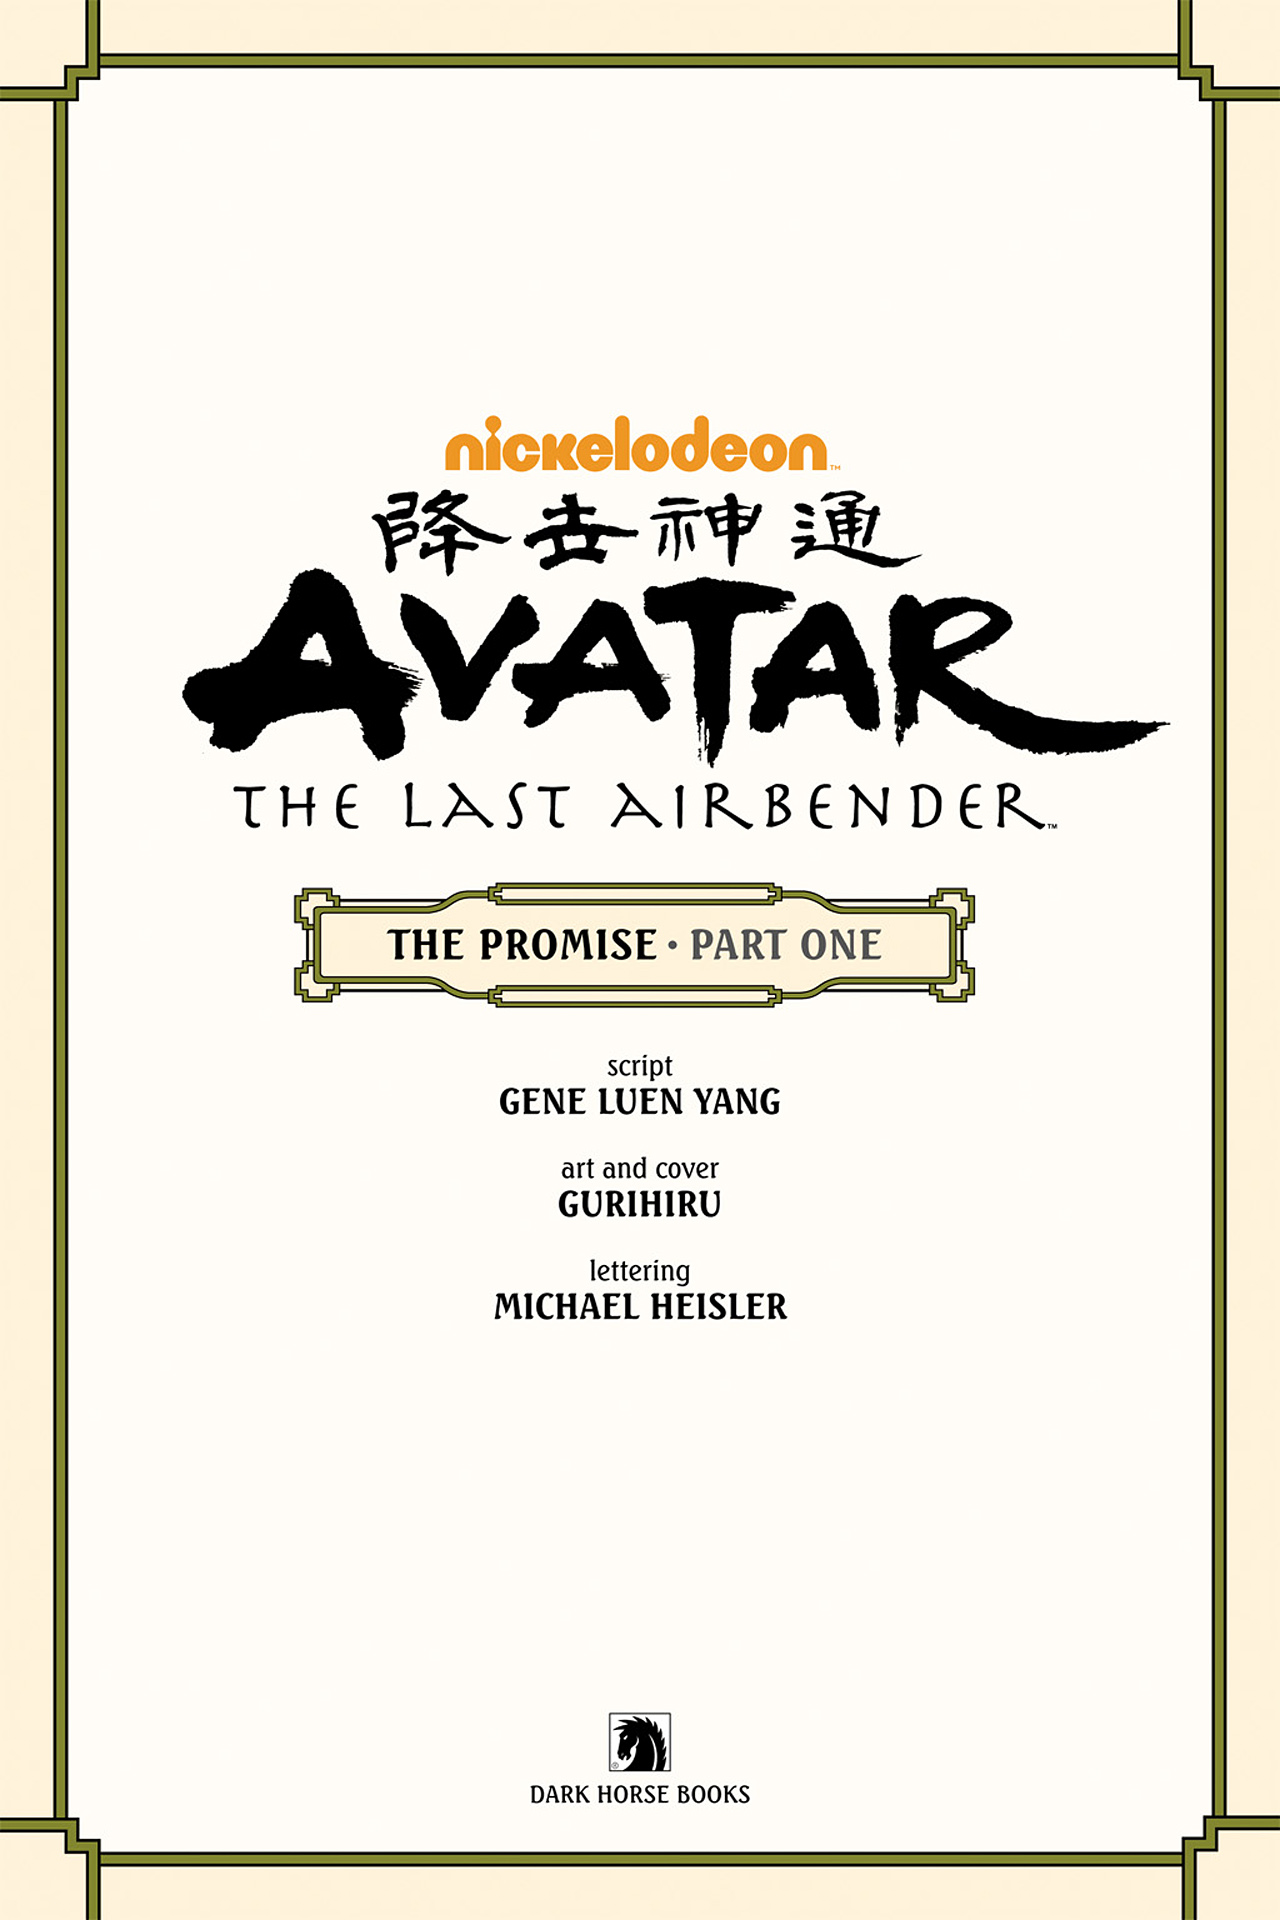 Read online Nickelodeon Avatar: The Last Airbender - The Promise comic -  Issue # Part 1 - 4